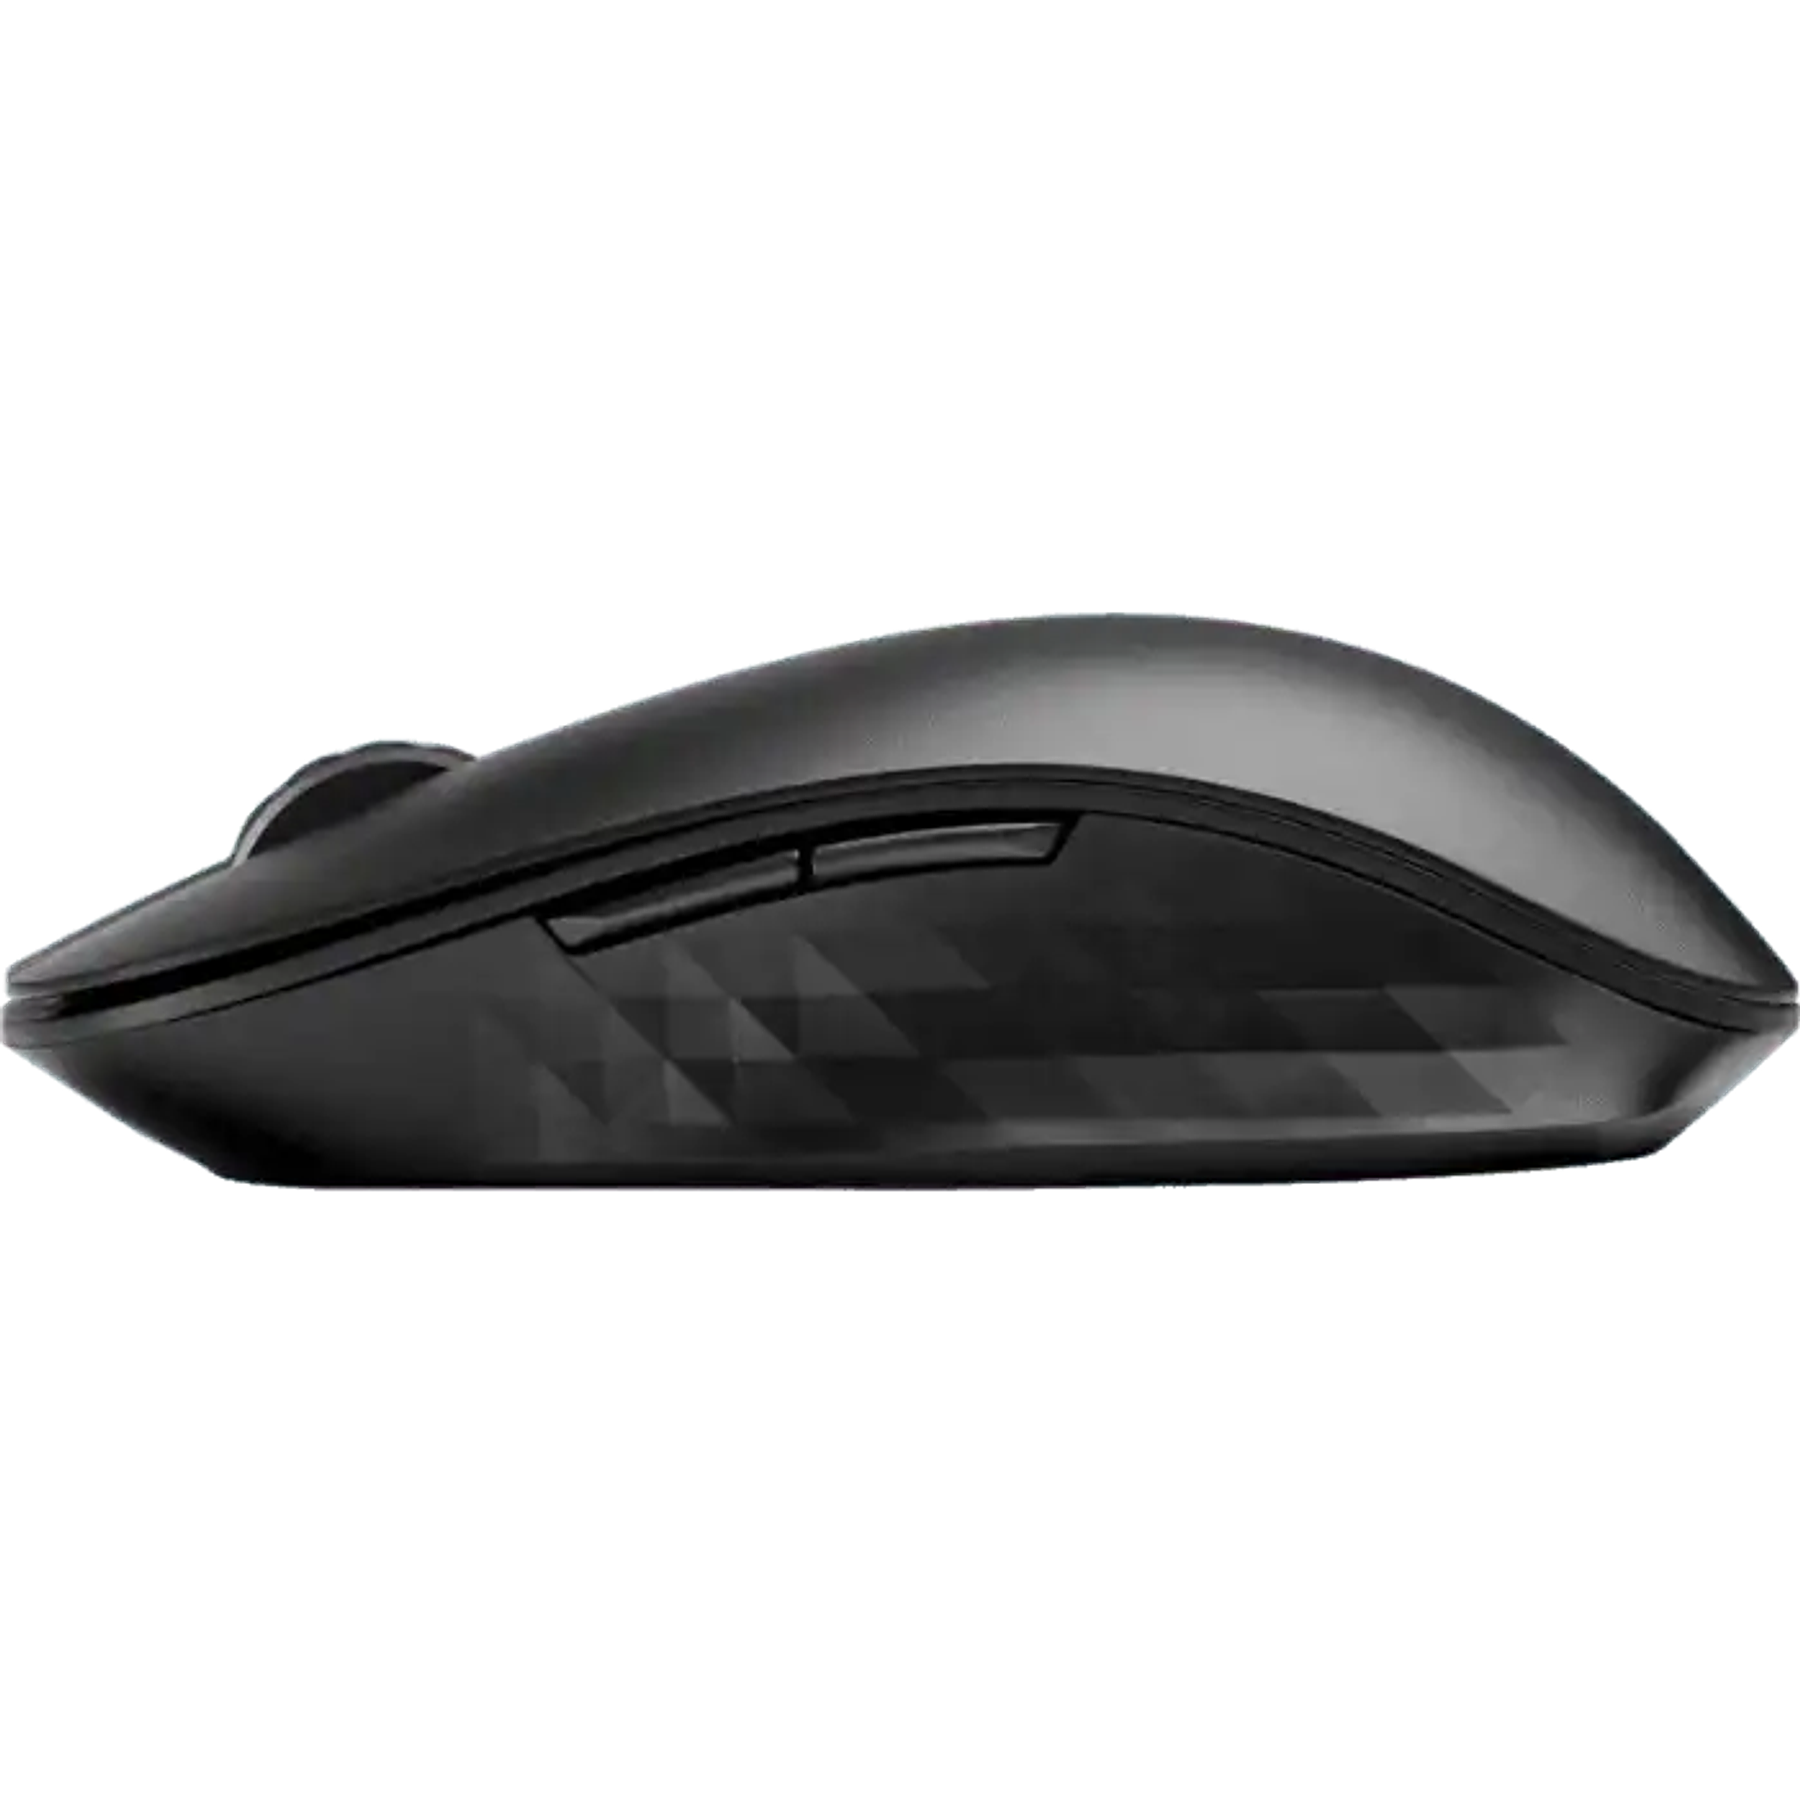 HP Bluetooth Travel Mouse US